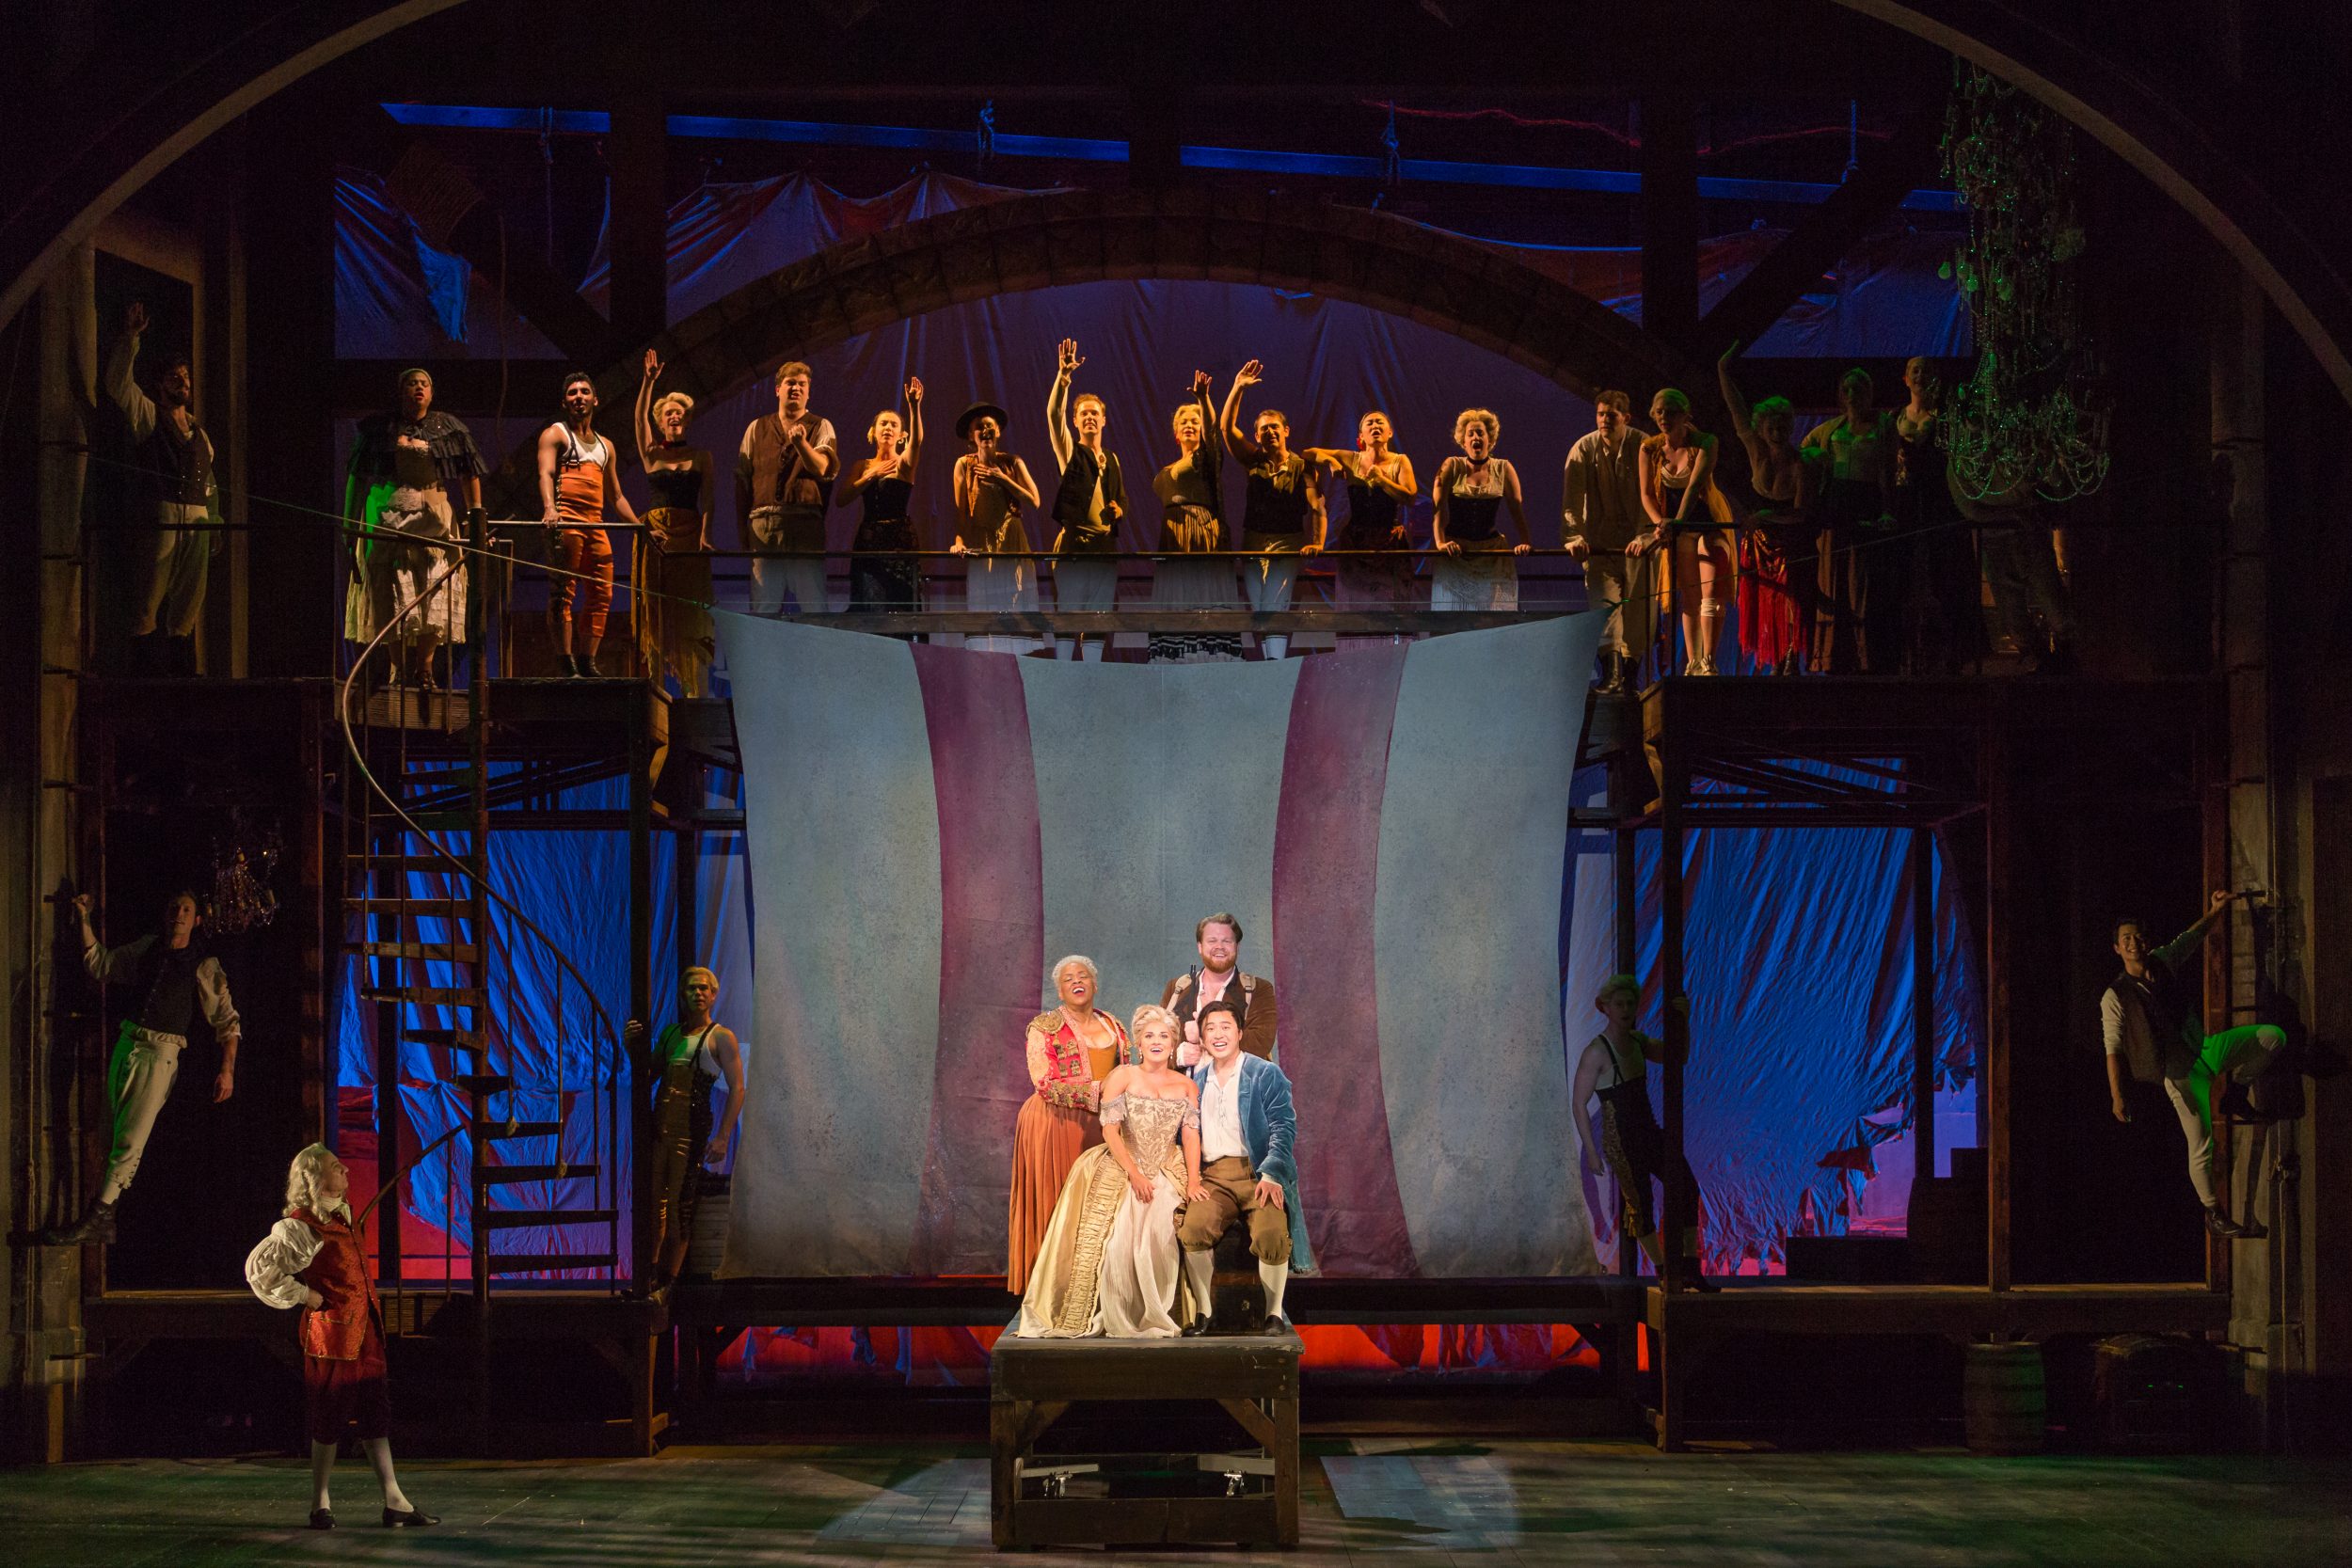 Cast on stage for the 2015 production of Candide.